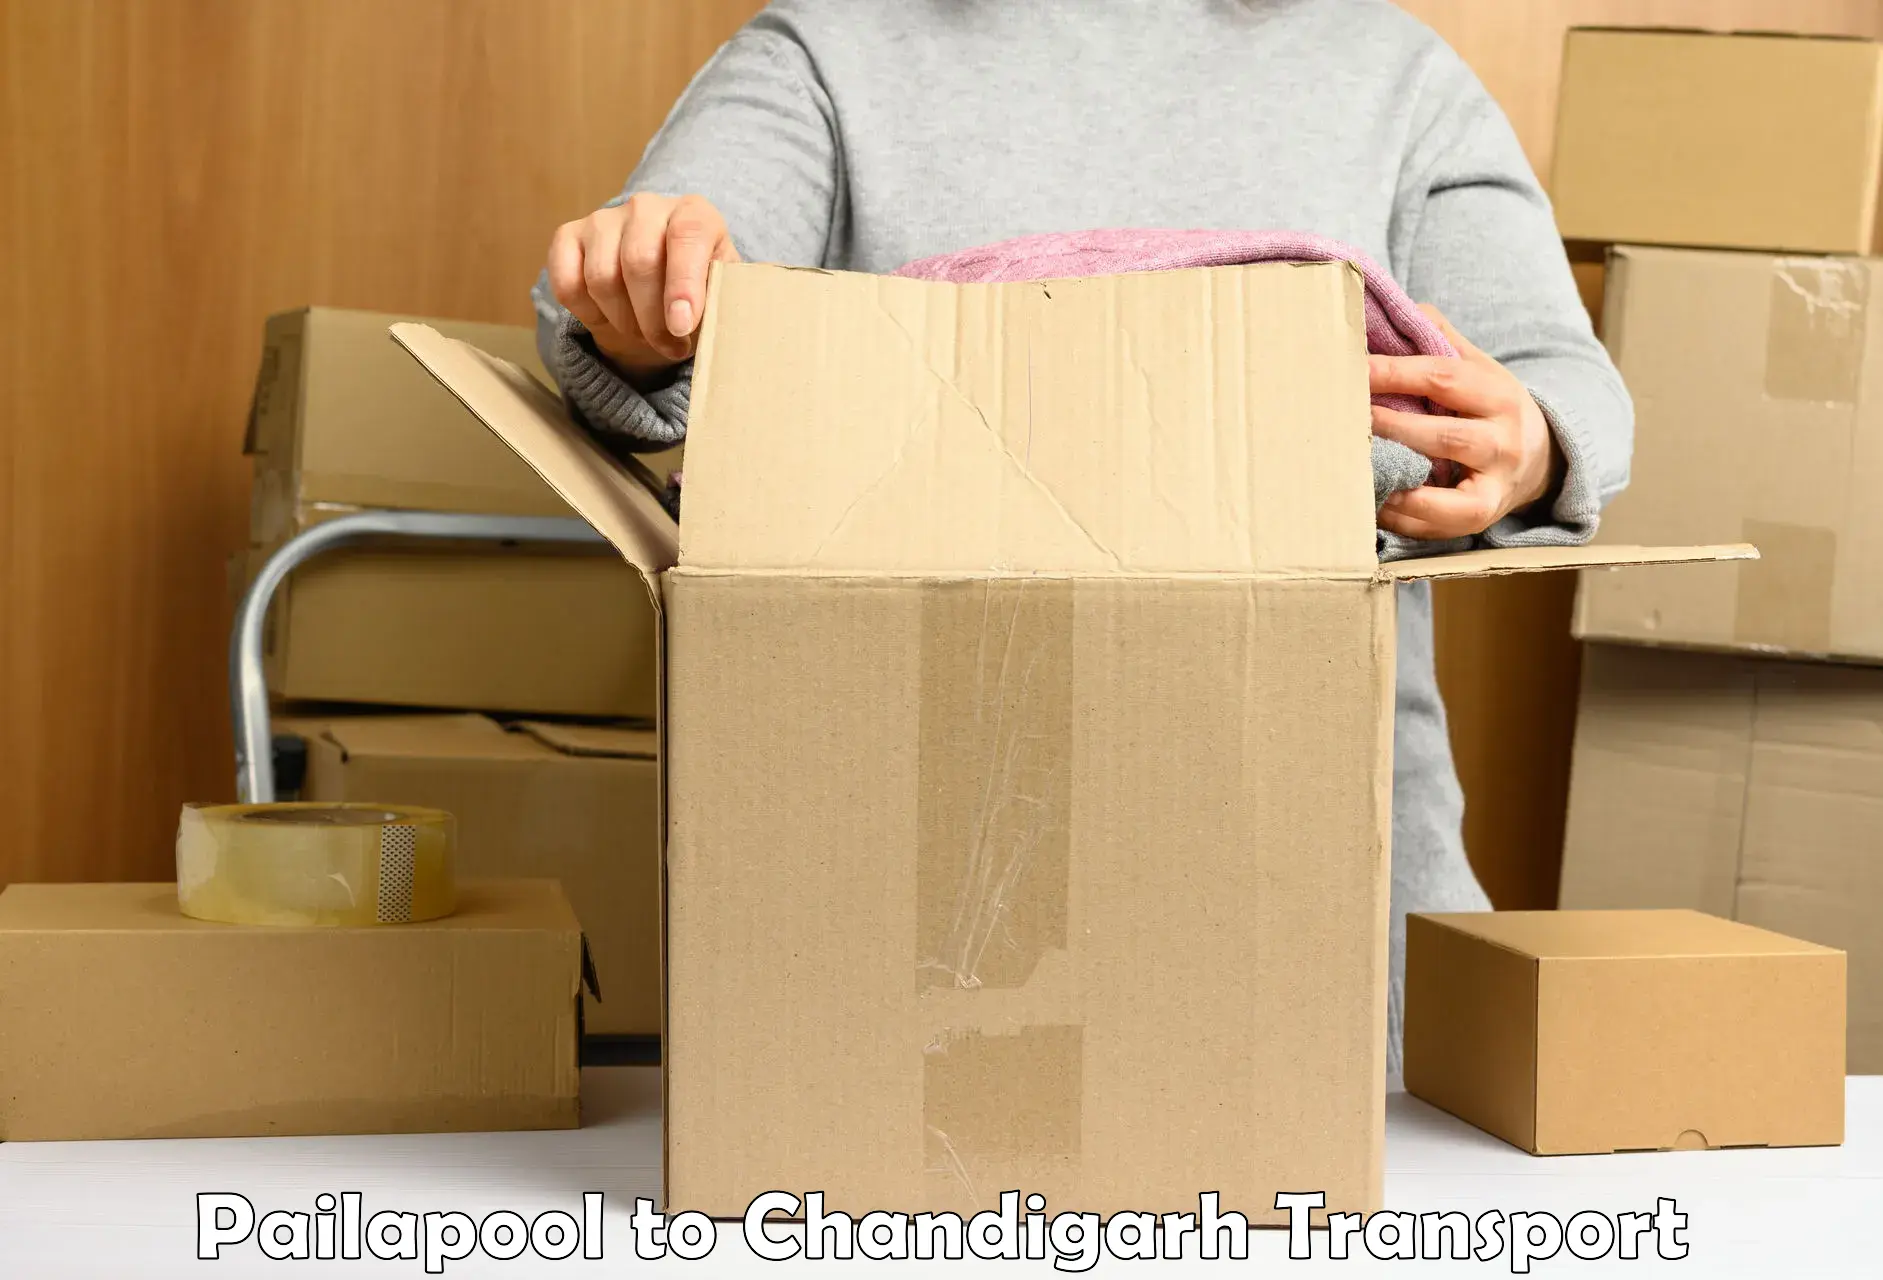 Part load transport service in India Pailapool to Chandigarh